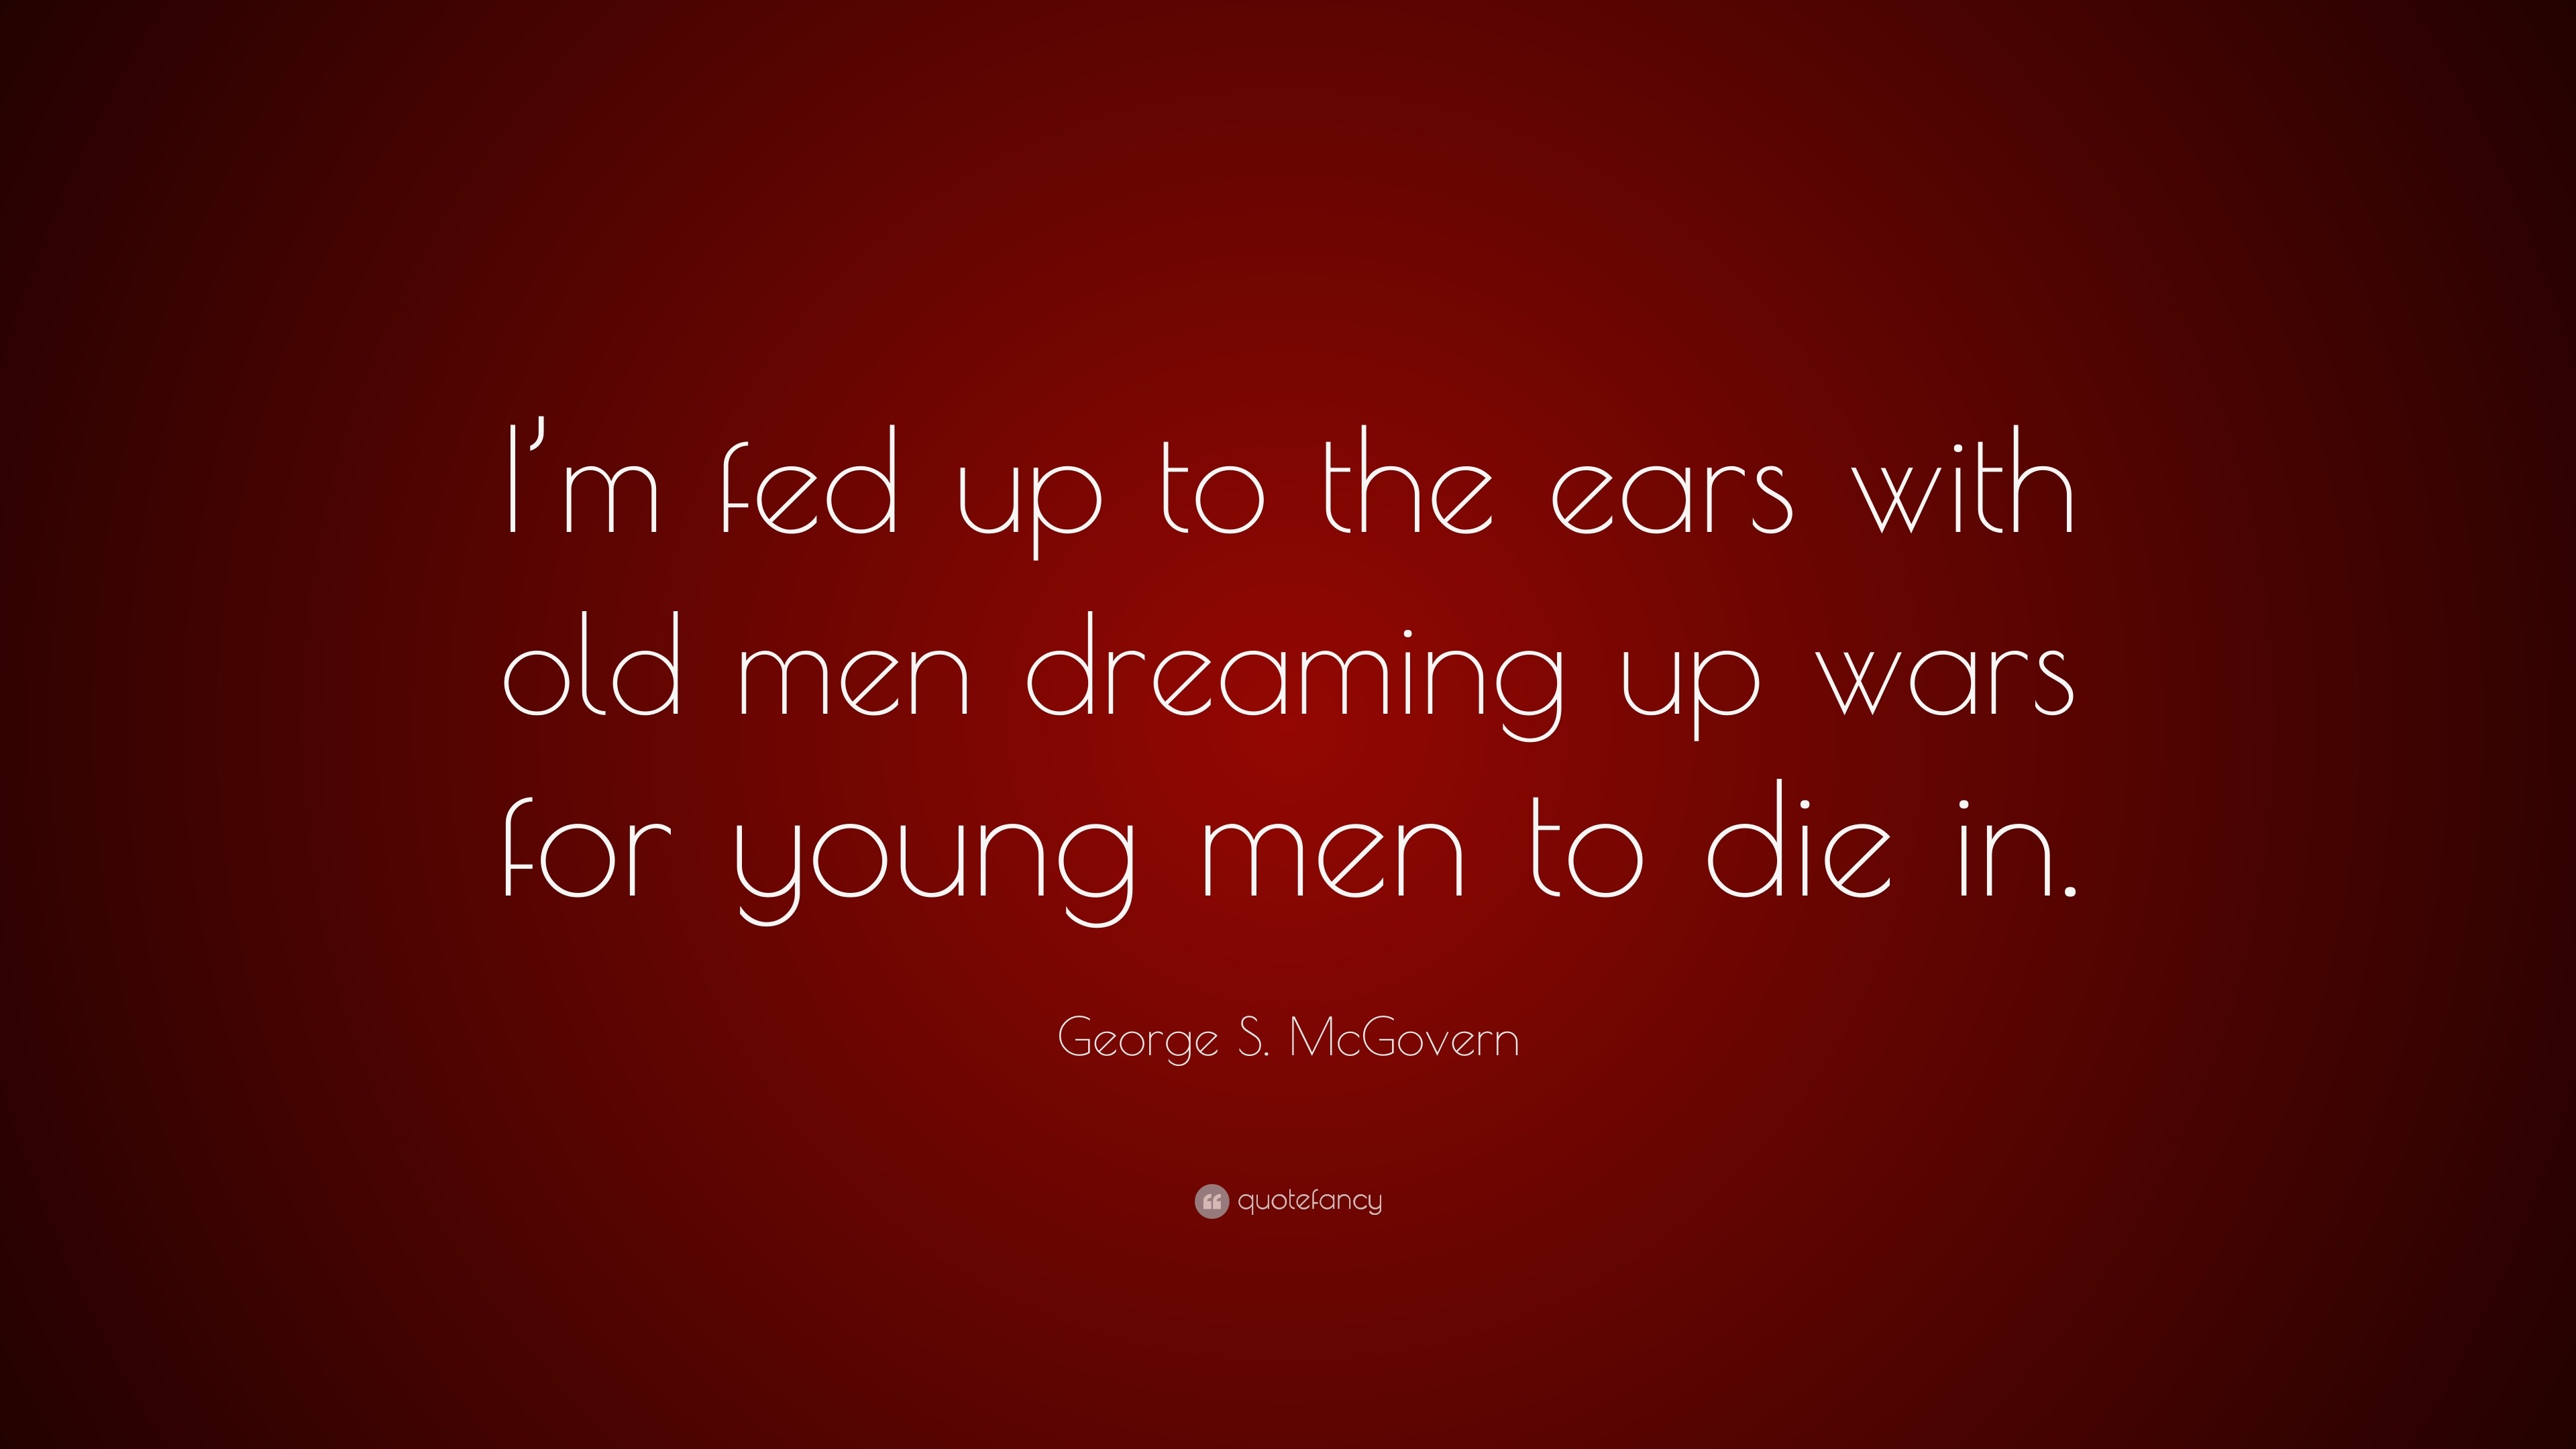 George S. McGovern Quote: “I’m fed up to the ears with old men dreaming